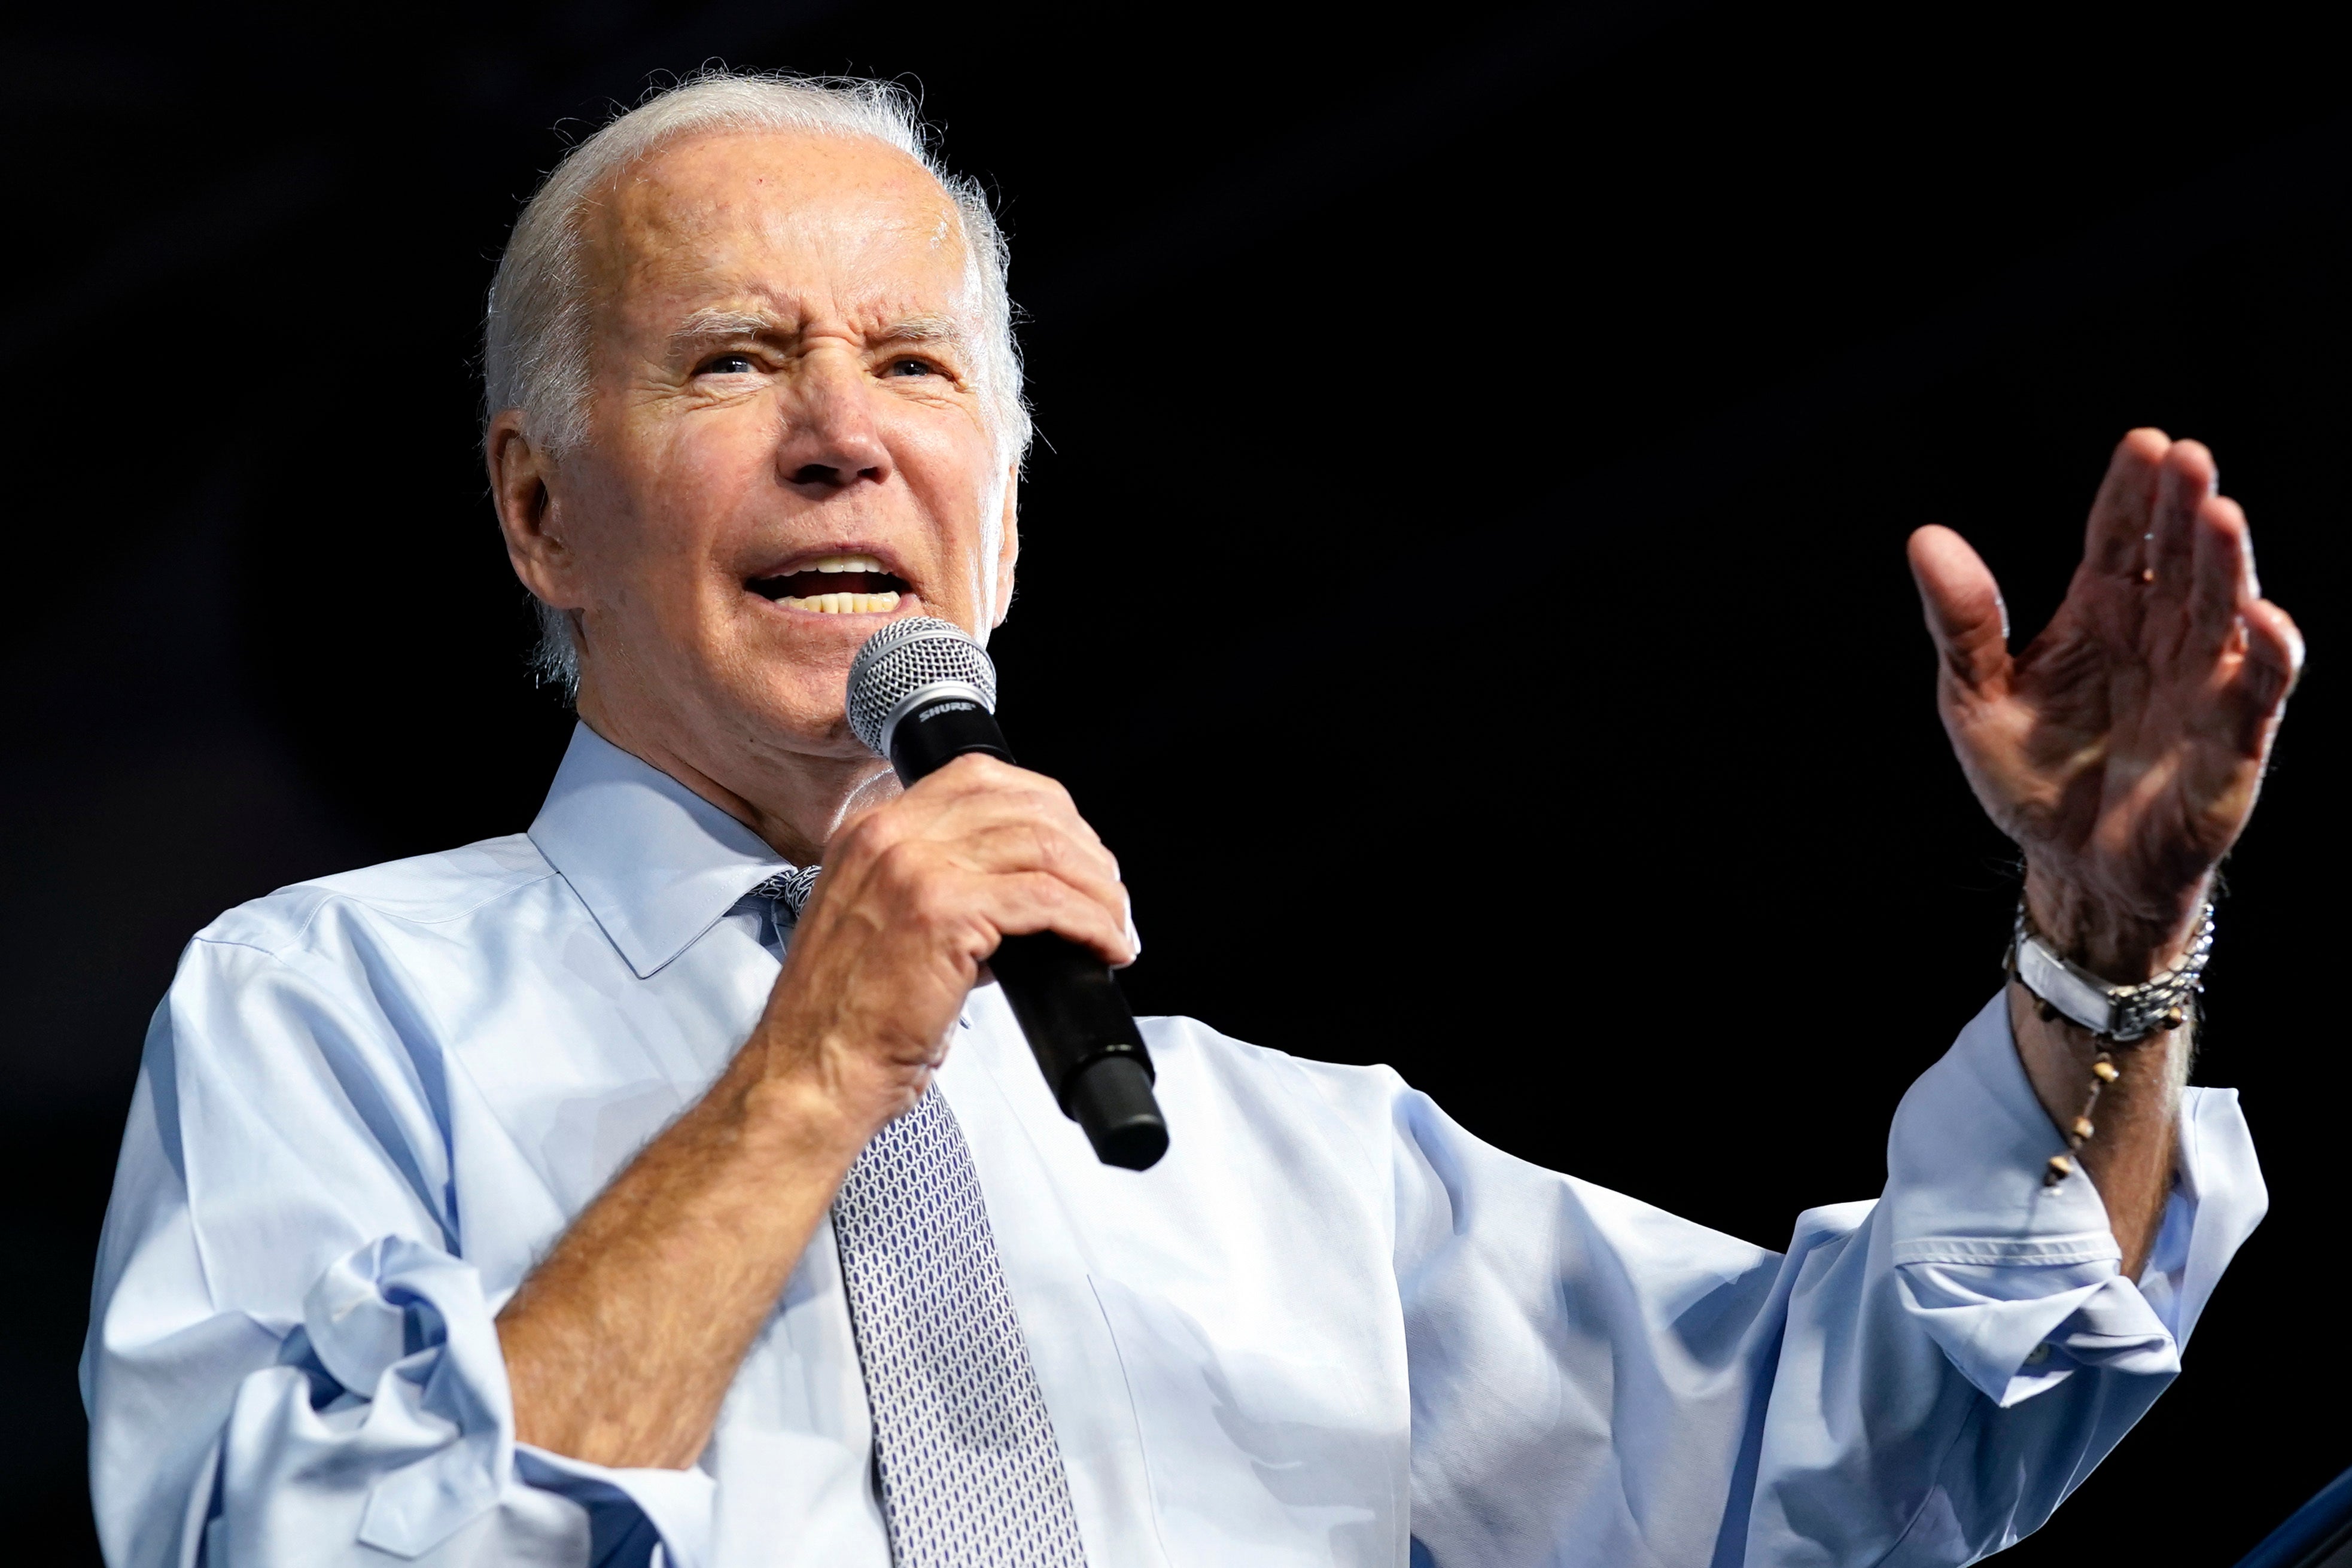 Biden shows little urgency as Dems mull 2024 primary shakeup The